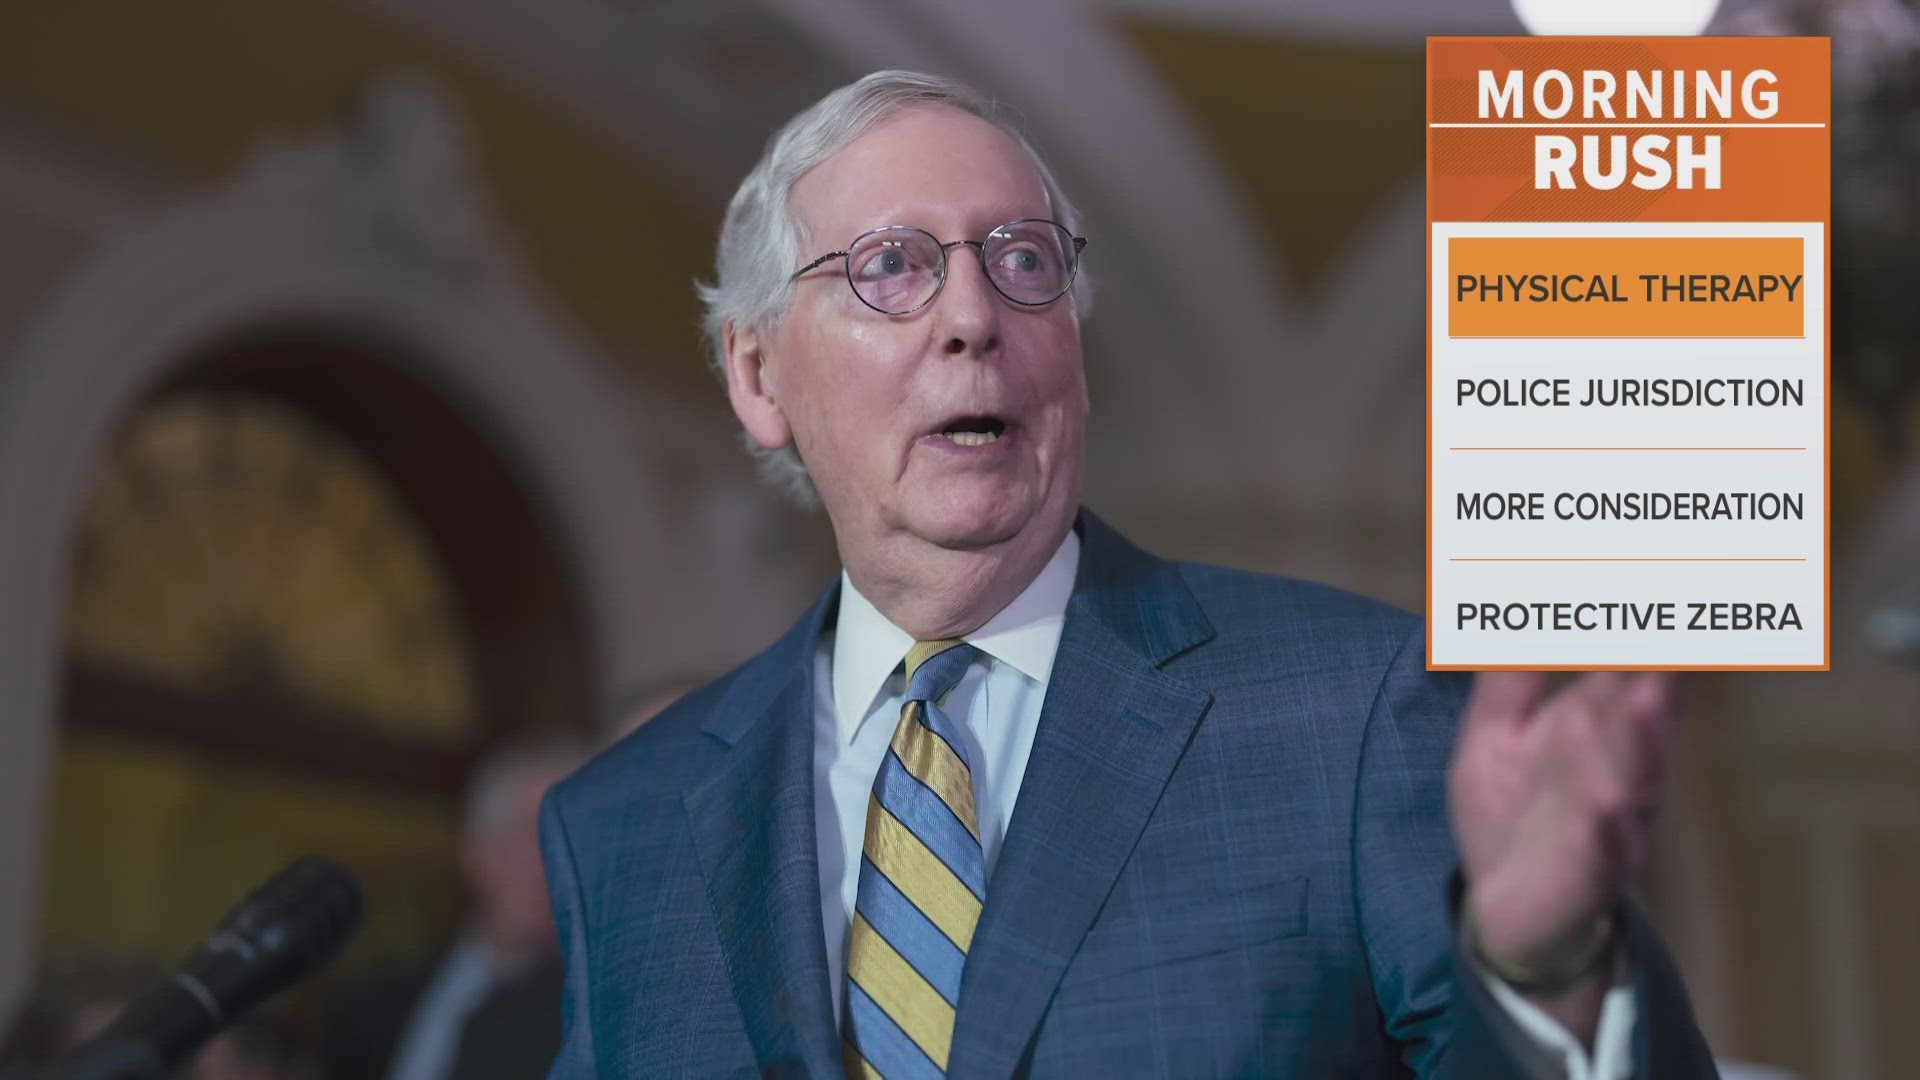 McConnell will have a period of physical therapy at an inpatient rehab facility before heading home, according to his spokesperson.